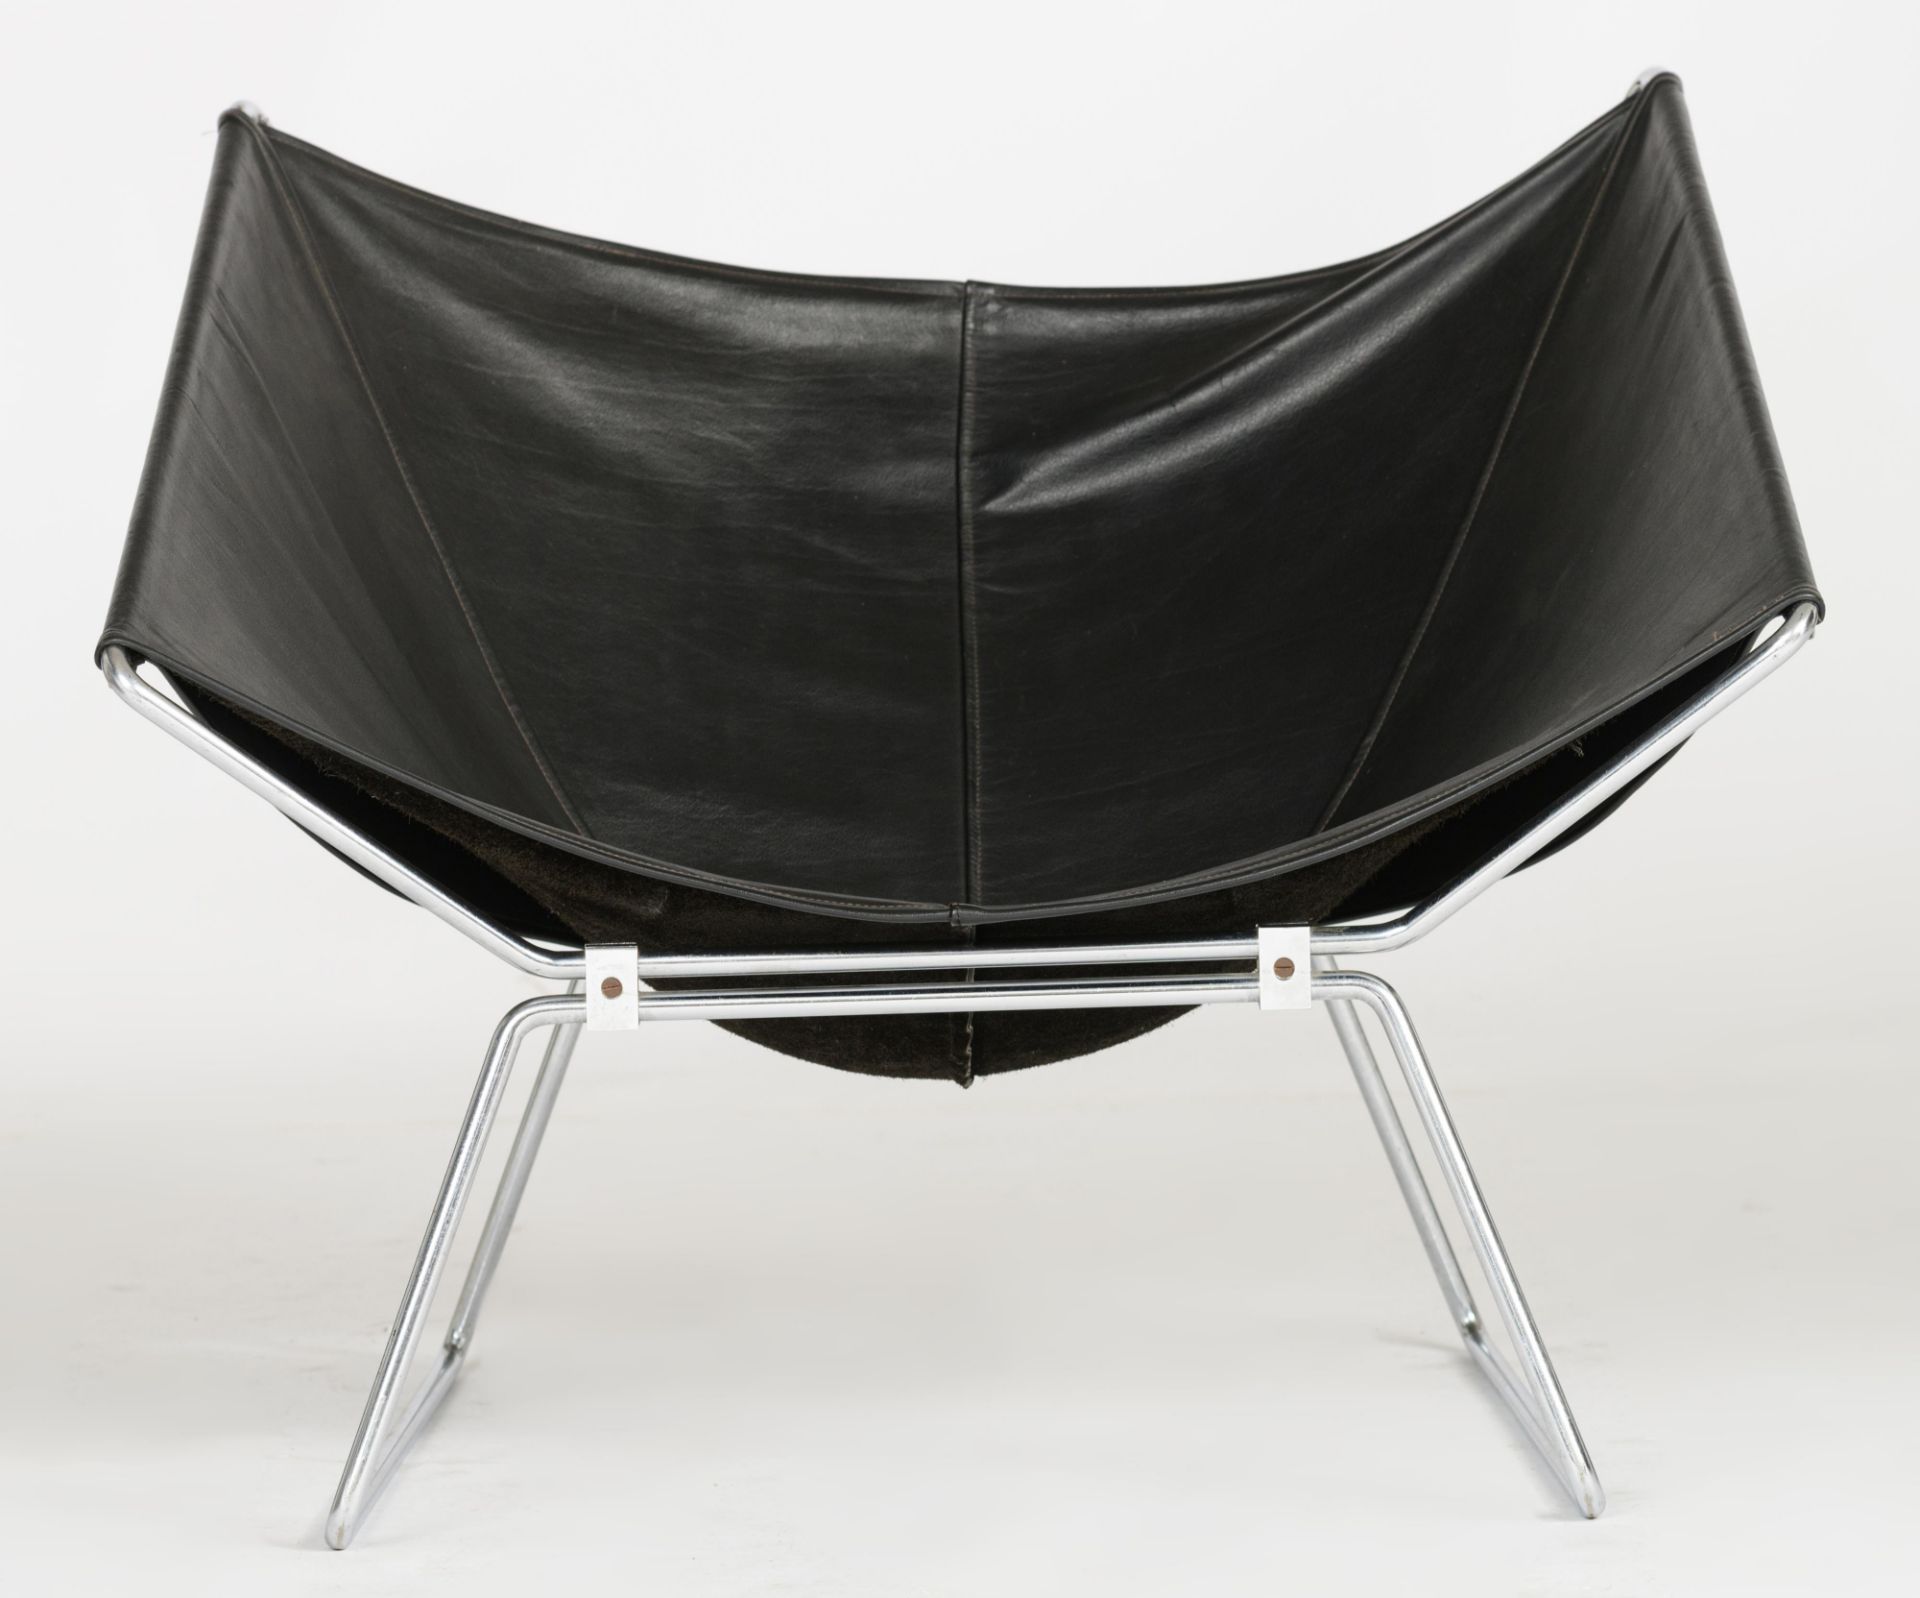 An AP-14 'butterfly' chair by Pierre Paulin for Polak, 1954, H 68,5 - W 77 - D 72 cm - Image 2 of 7